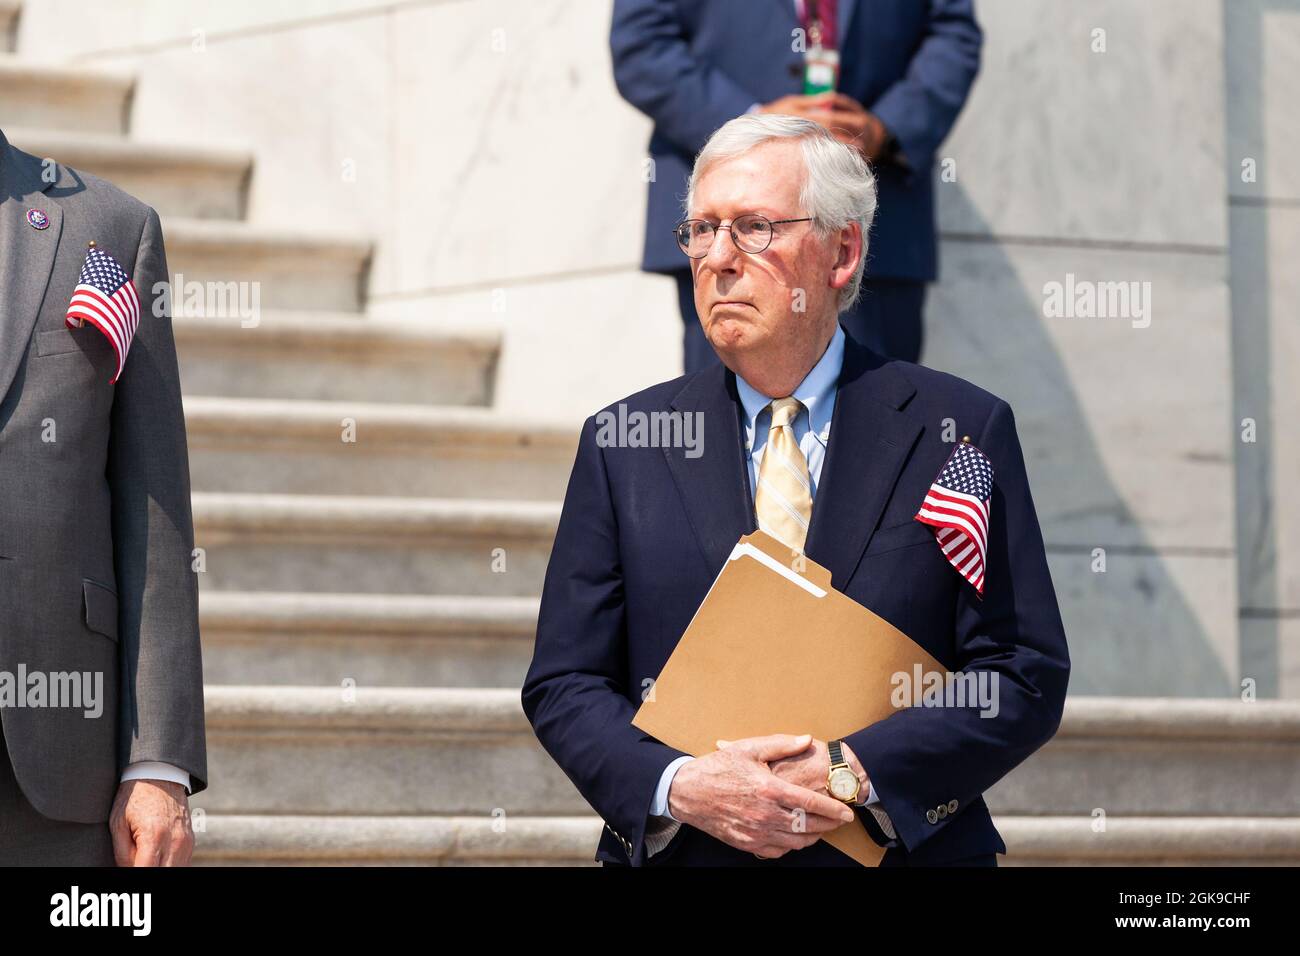 Washington DC, USA. 13th Sep 2021. Senate Minority Leader Mitch McConnell, Republican of Kentucky, attends a ceremony on the Capitol steps in remembrance of the victims of the September 11th attacks. Credit: Allison Bailey/Alamy Live News Stock Photo